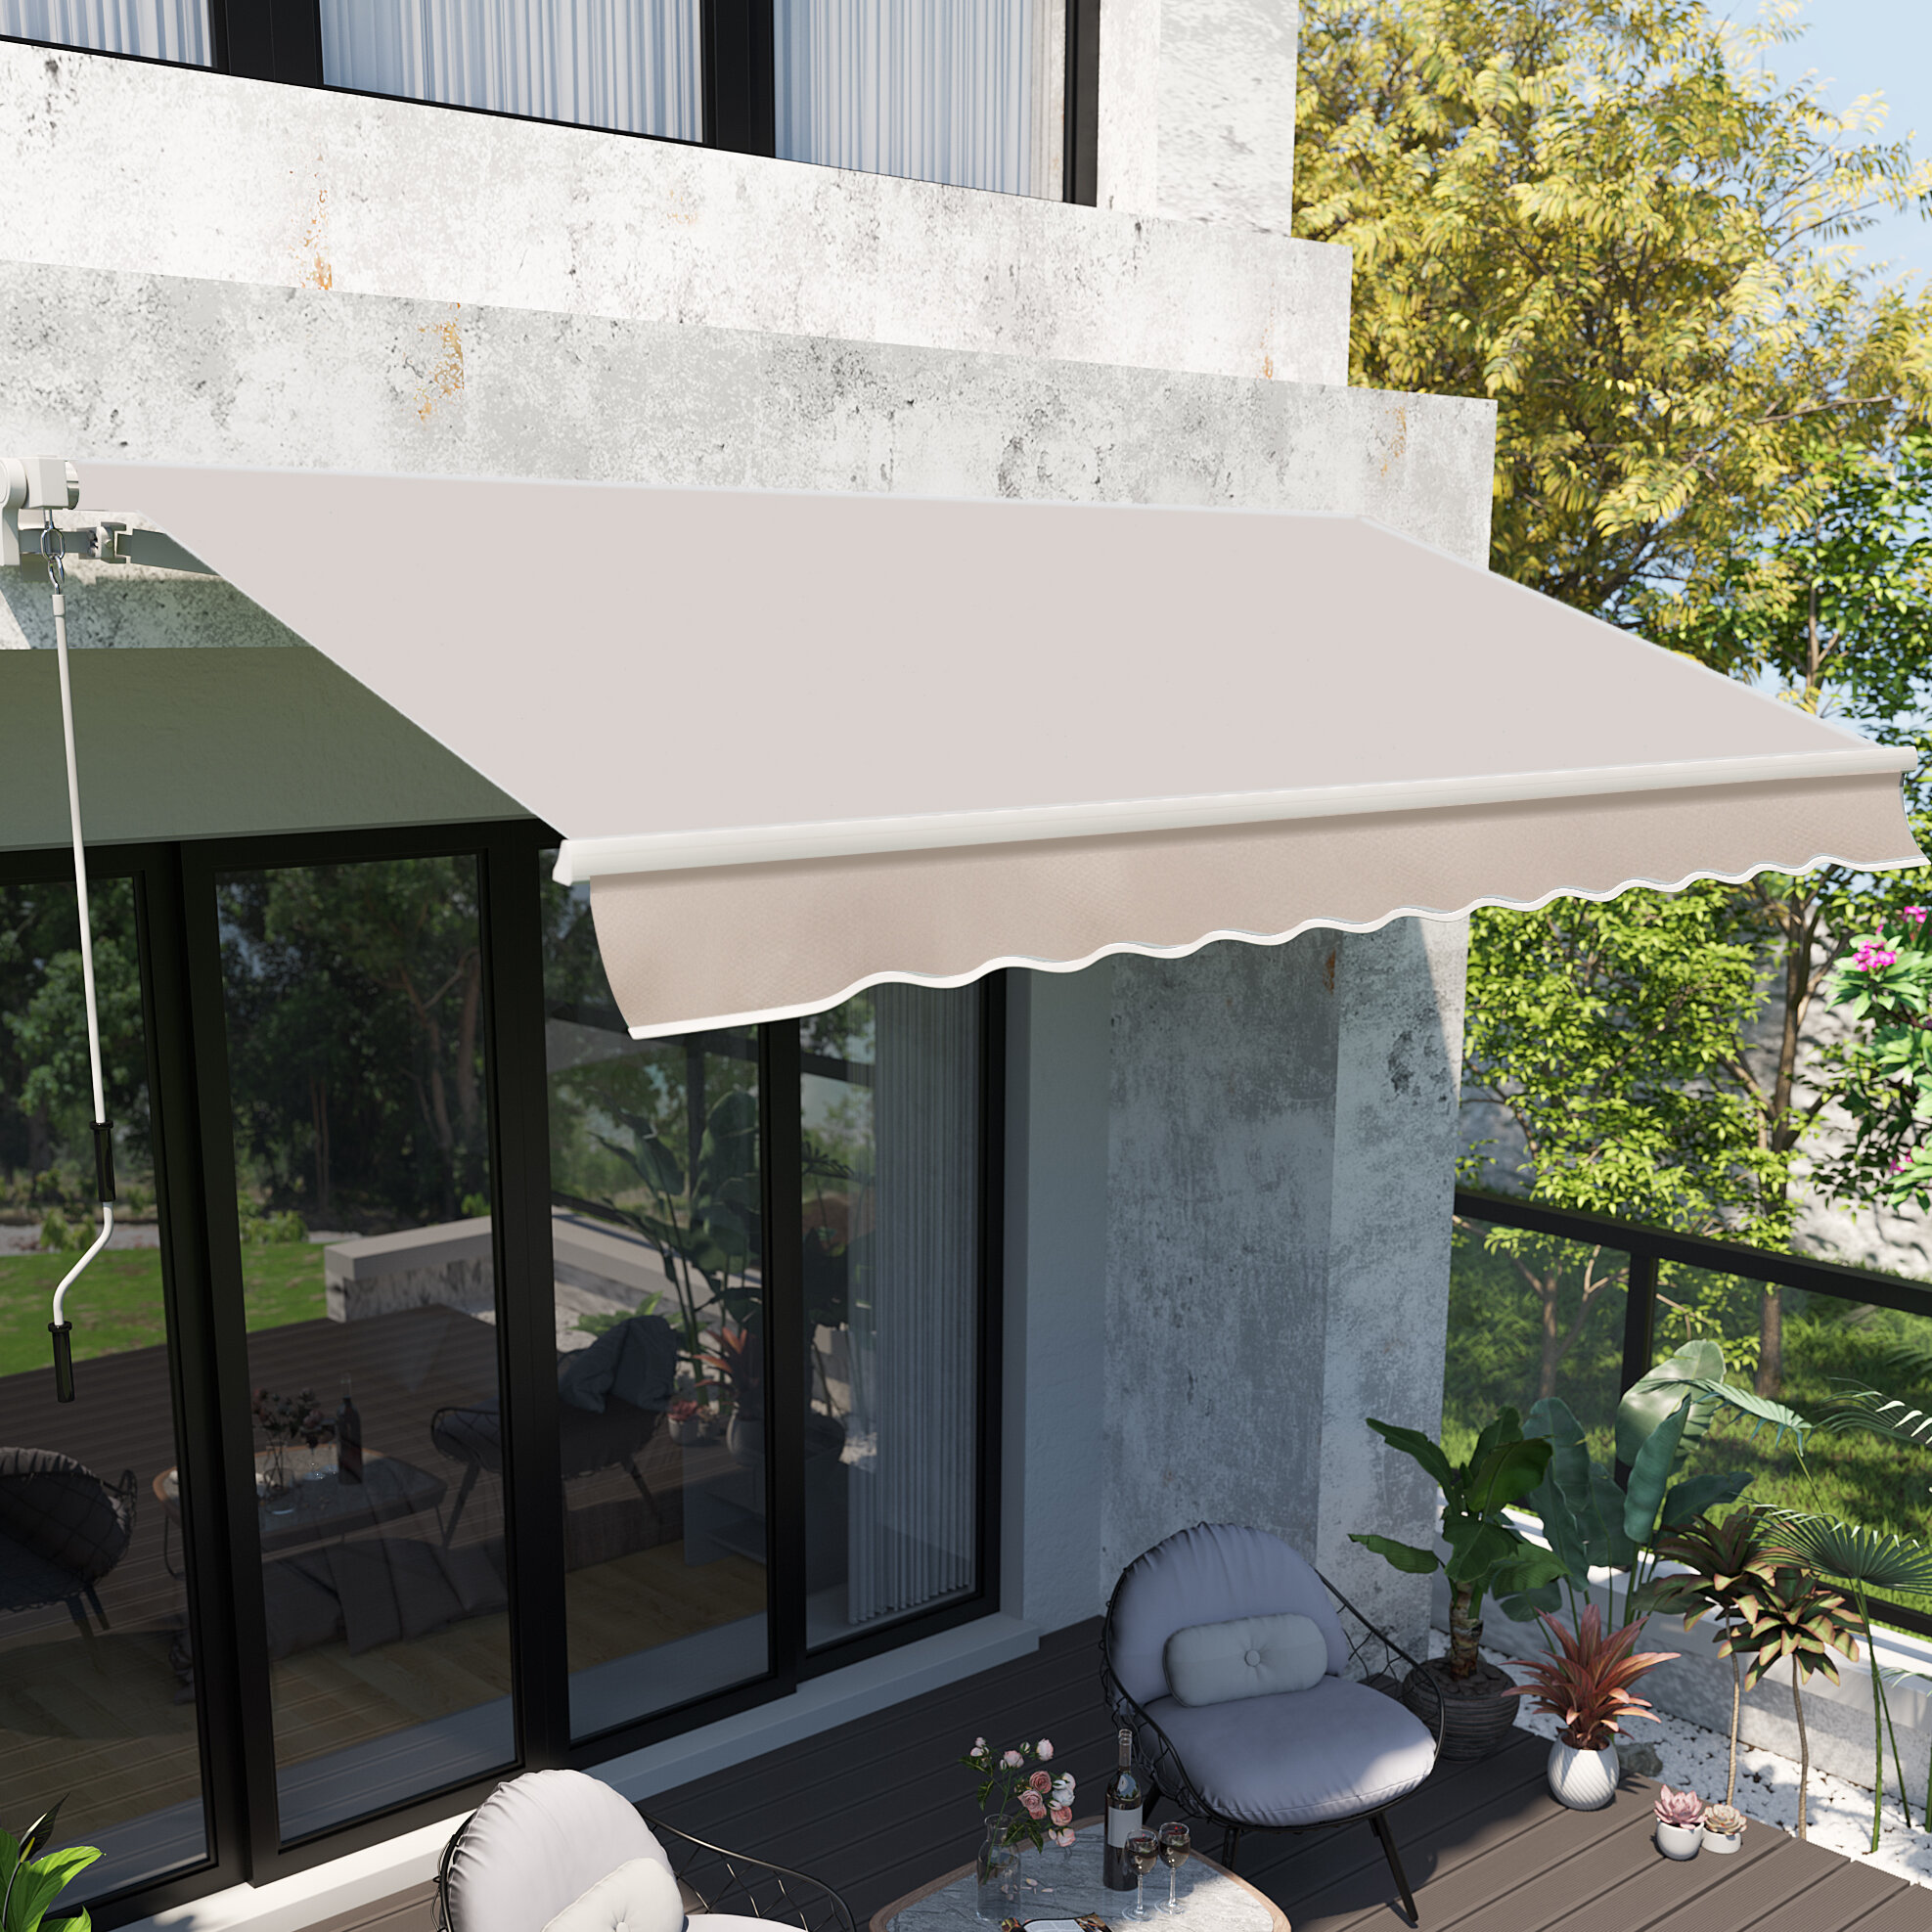 200cm x 600cm, Grey Terrace and Garden LARS360 Side Awning Retractable Extendable Polyester Awning Blind Patio Sunshade Outdoor Privacy Screen for Balcony